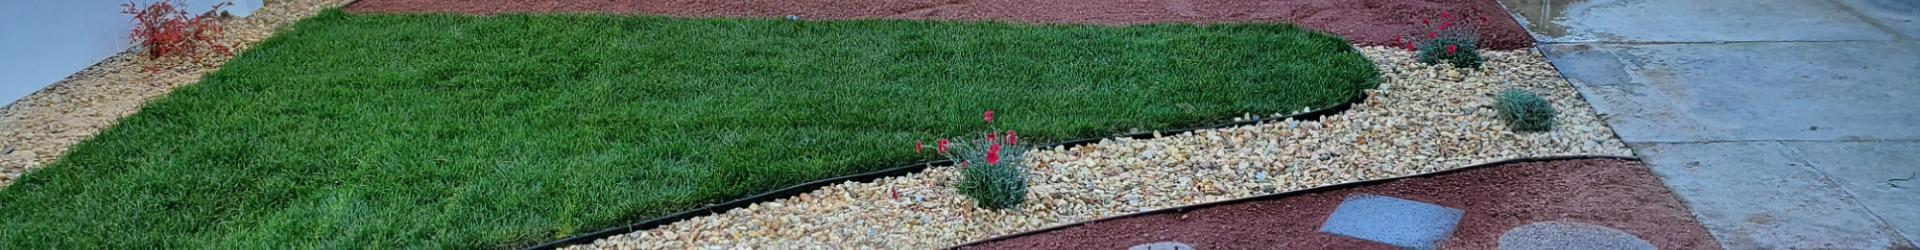 Best Commercial Lawn Services Fresno, Clovis, Madera, Reedley